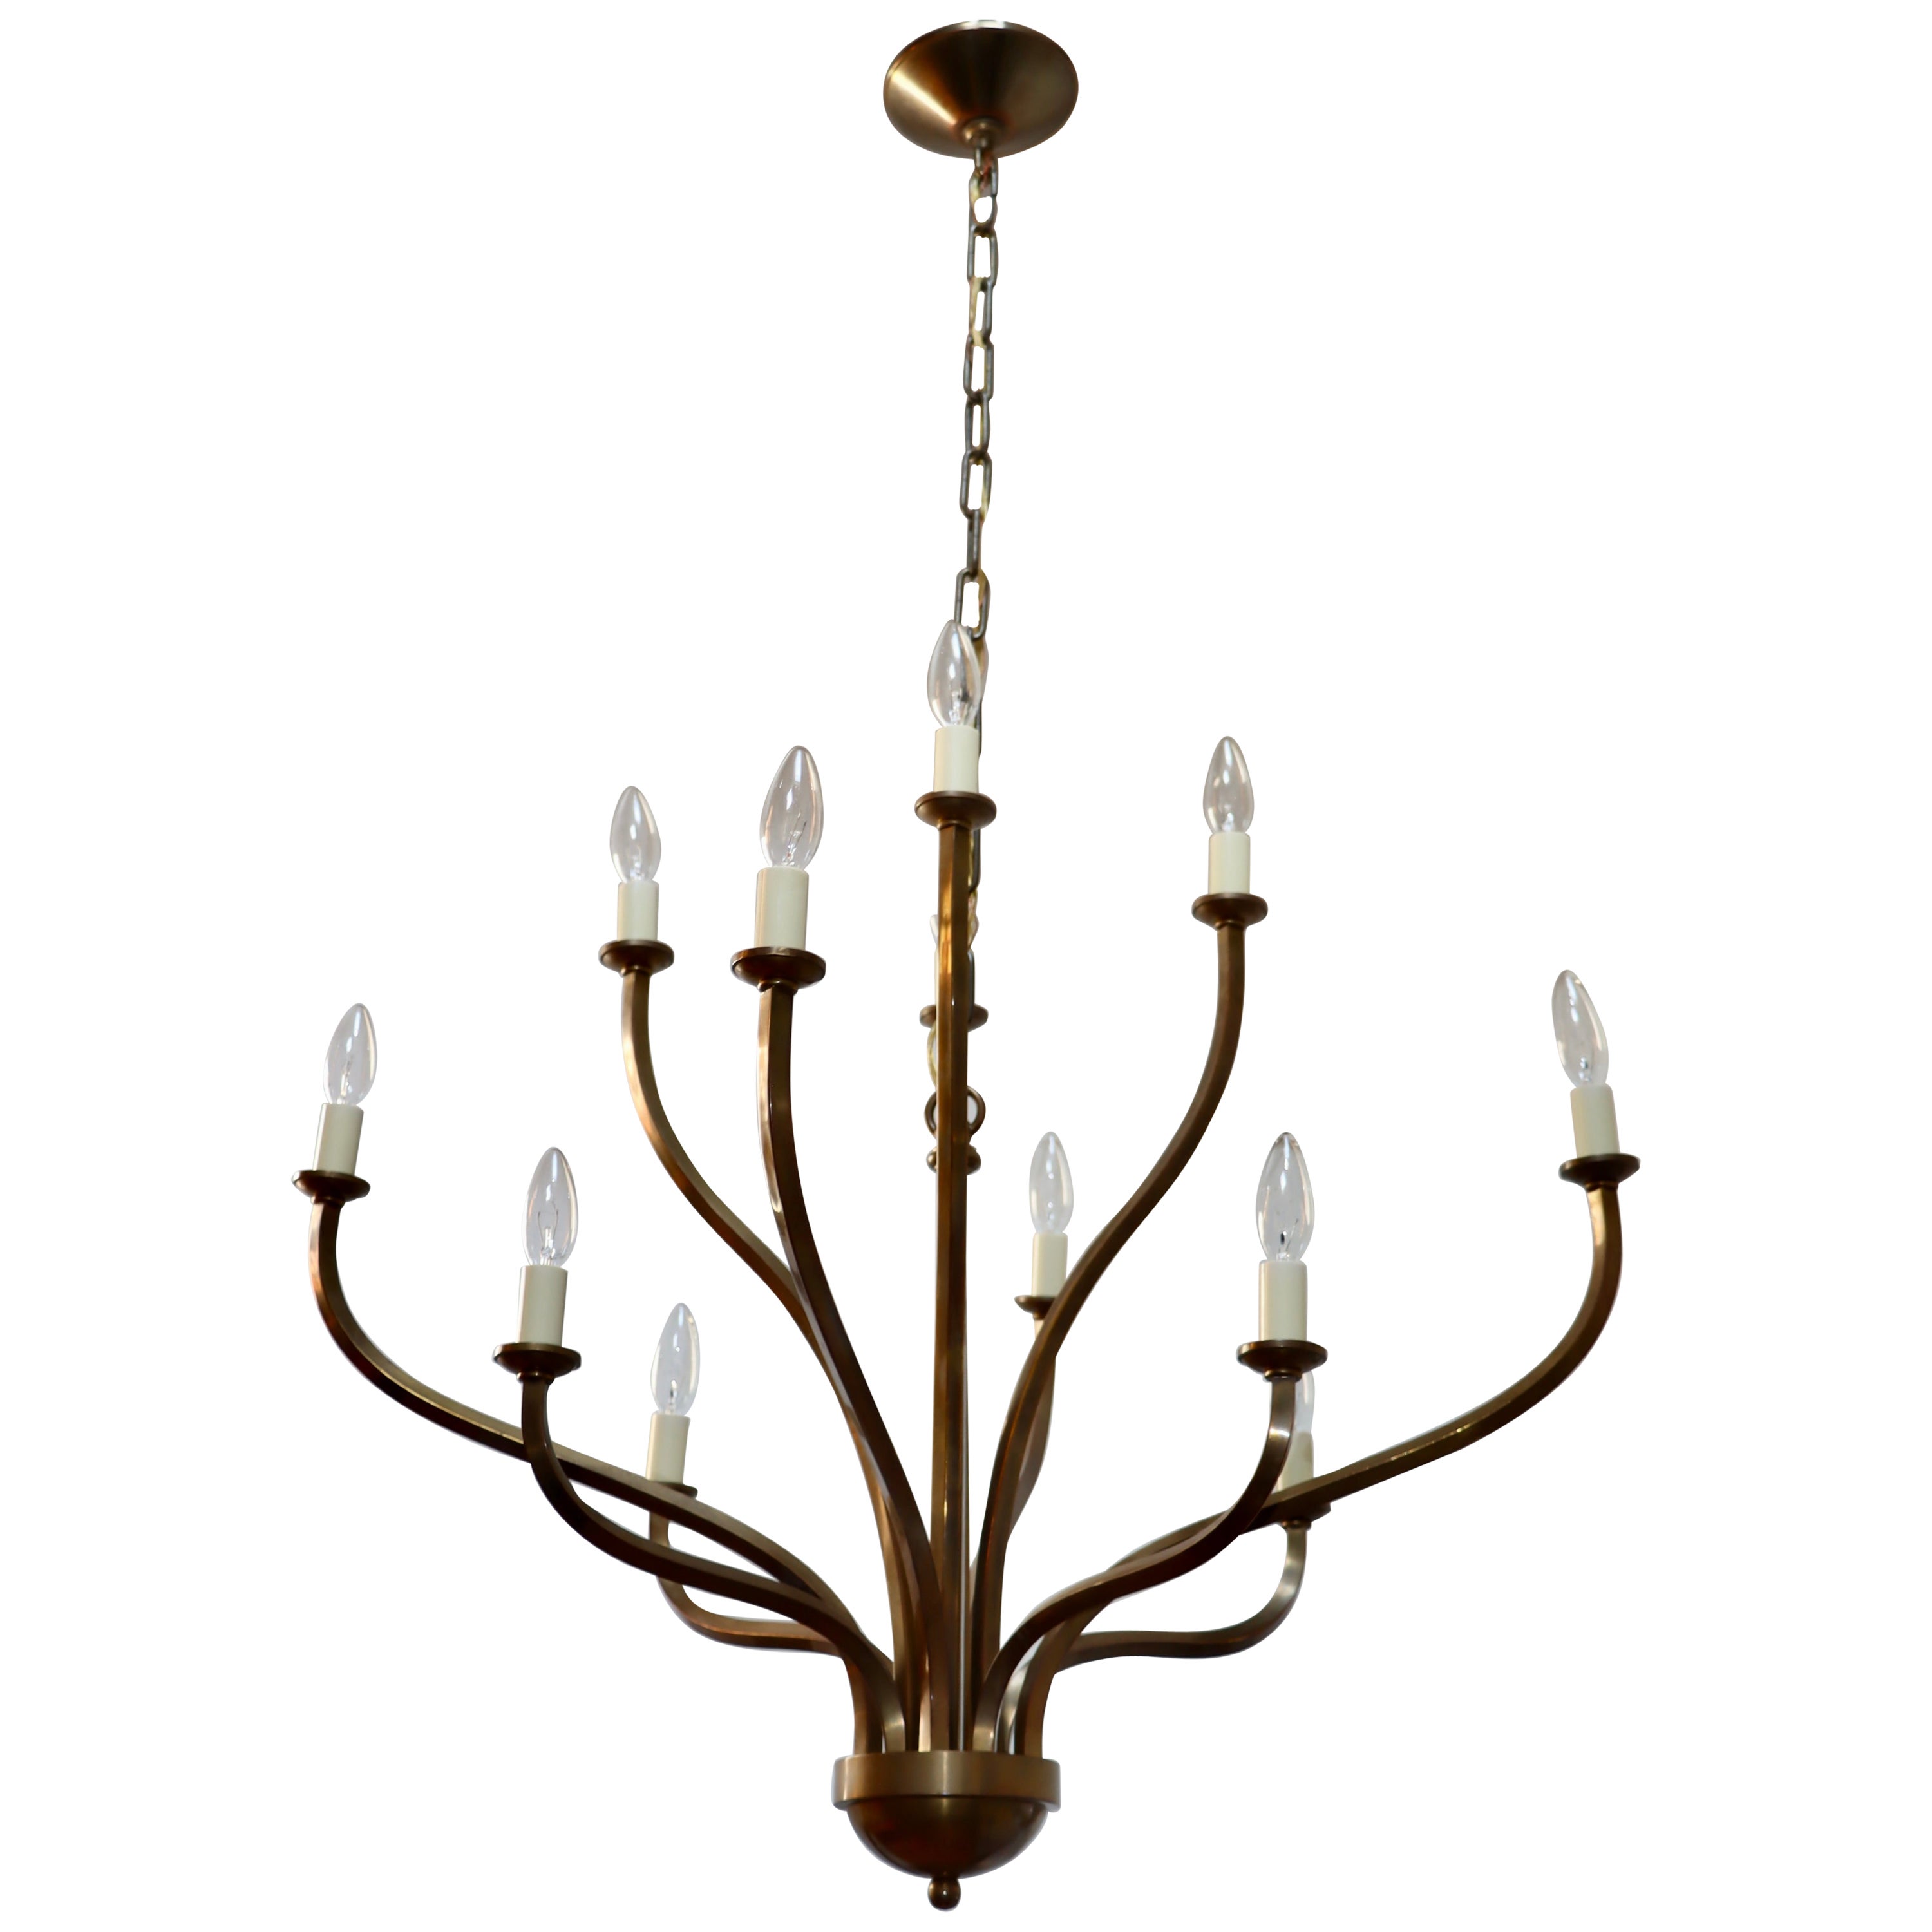 1970s Patinated Brass 12 Arm Chandelier Attributed to Hart Associates For Sale